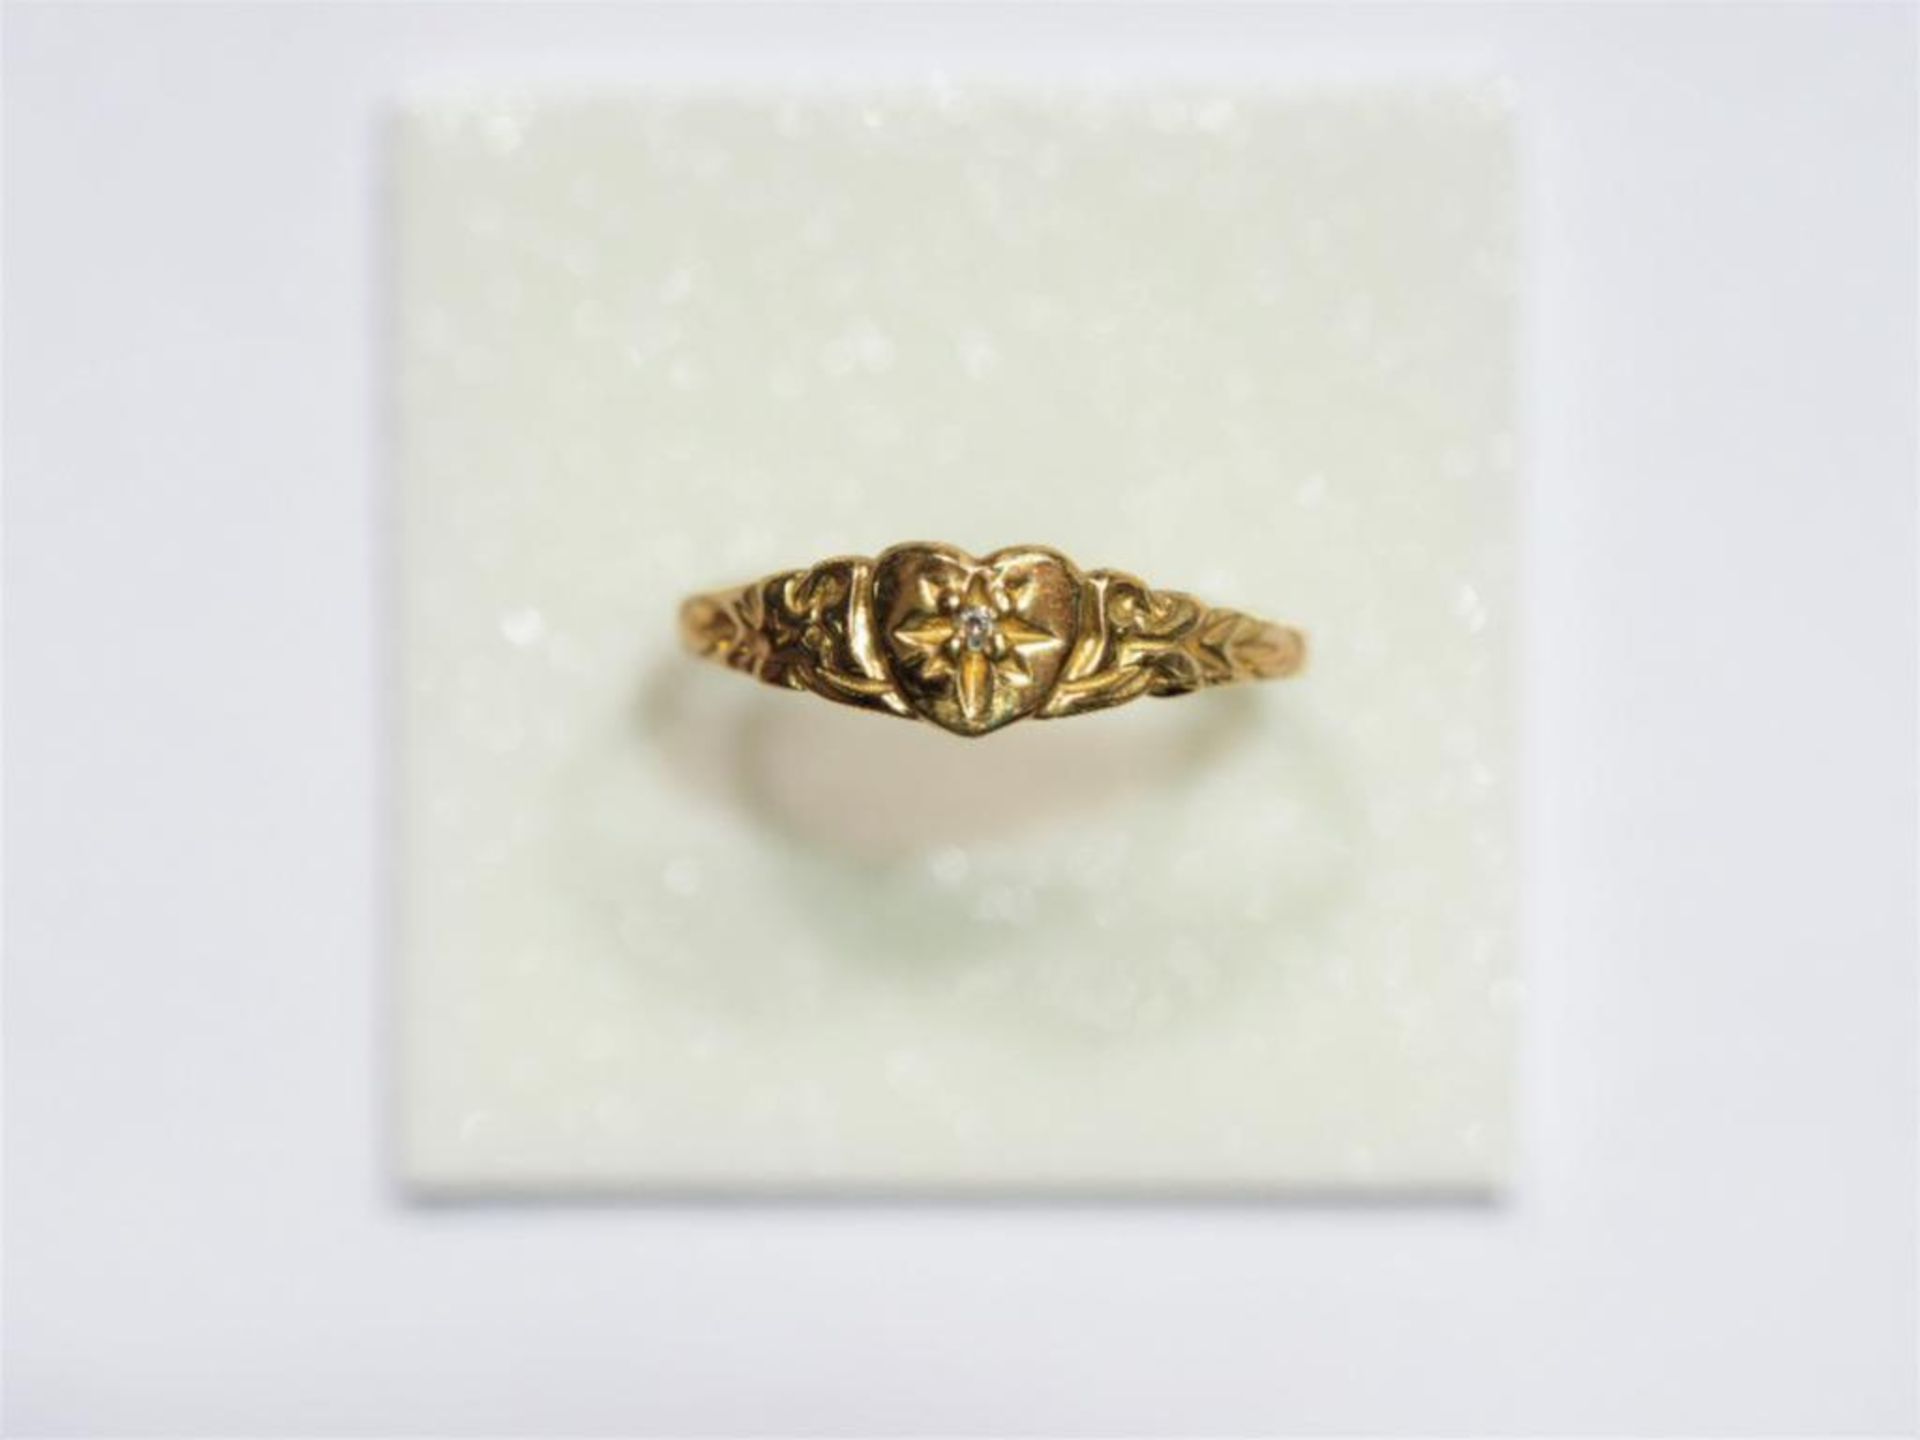 10kt Gold Baby Ring with Diamond. Retail $400